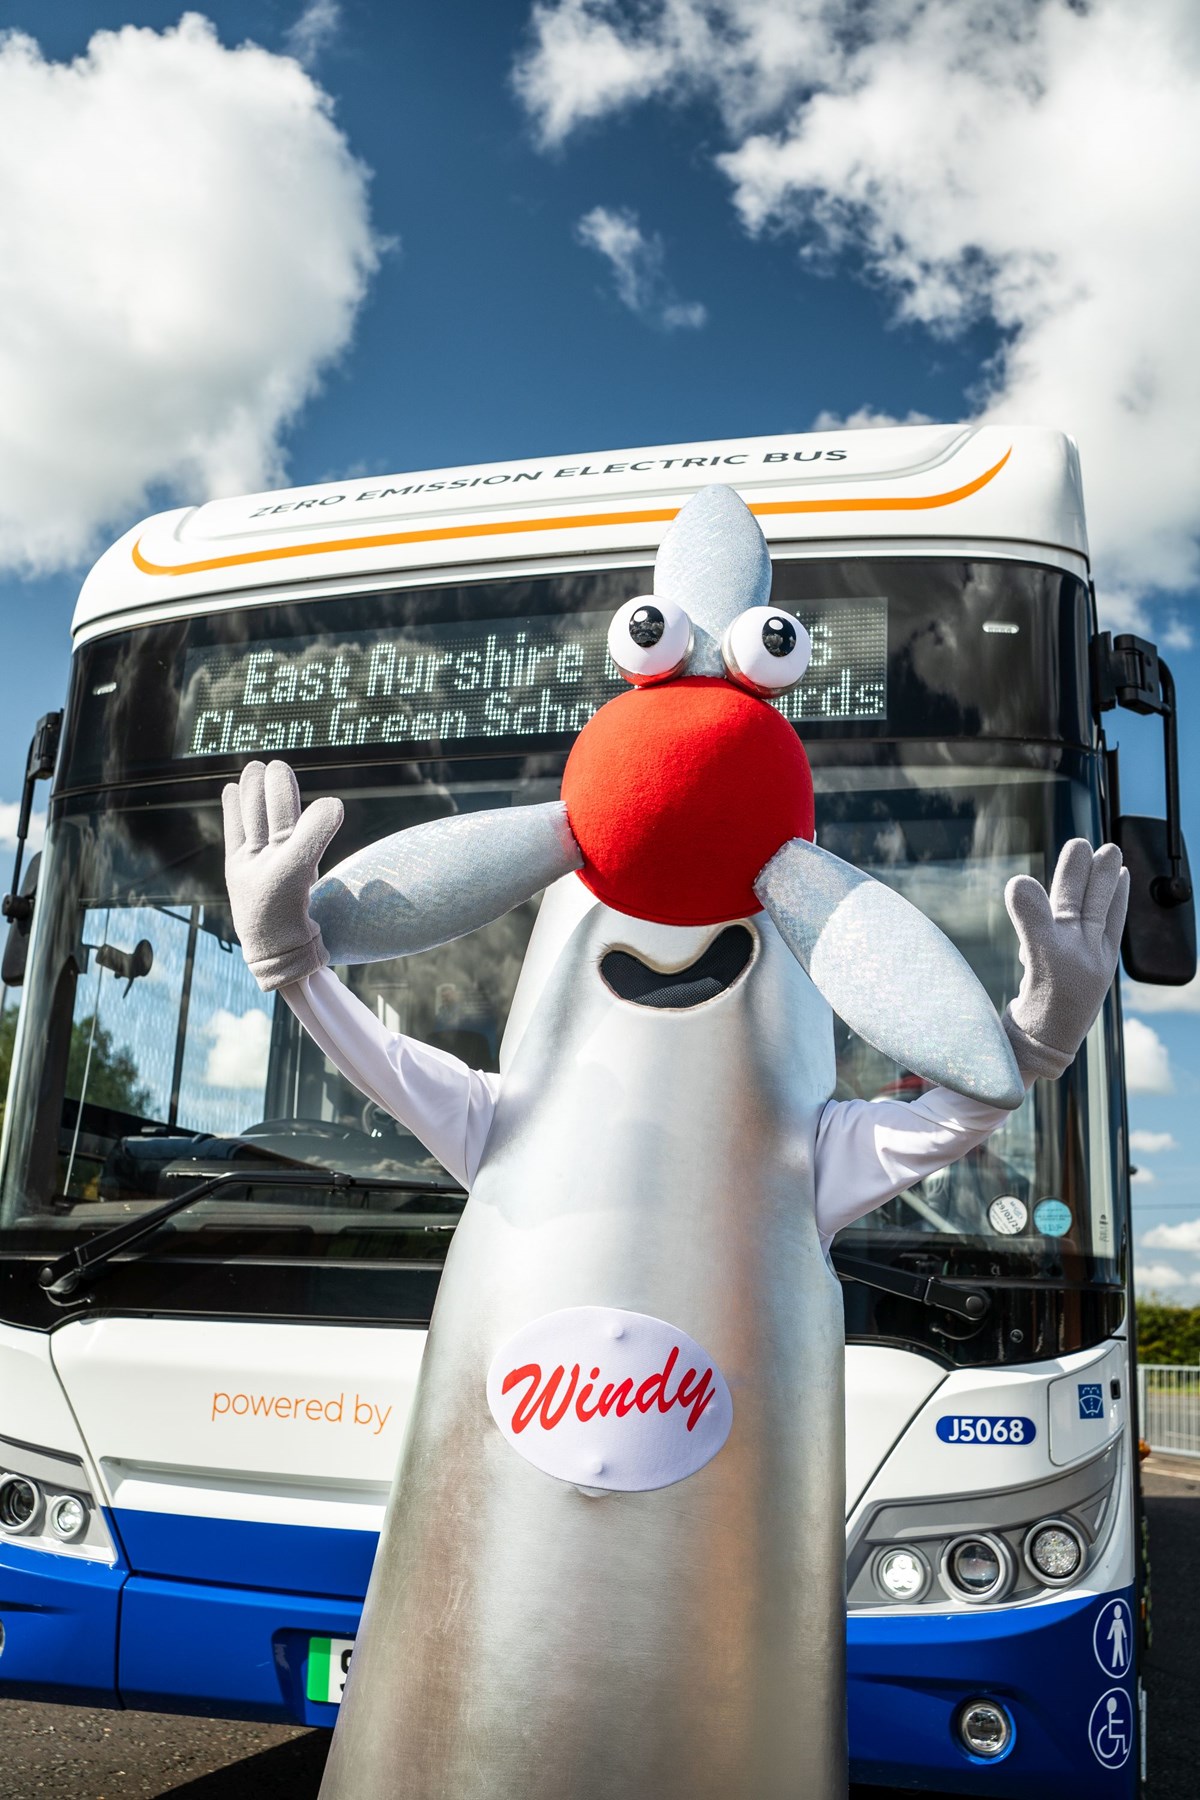 Windy uses sustainable travel